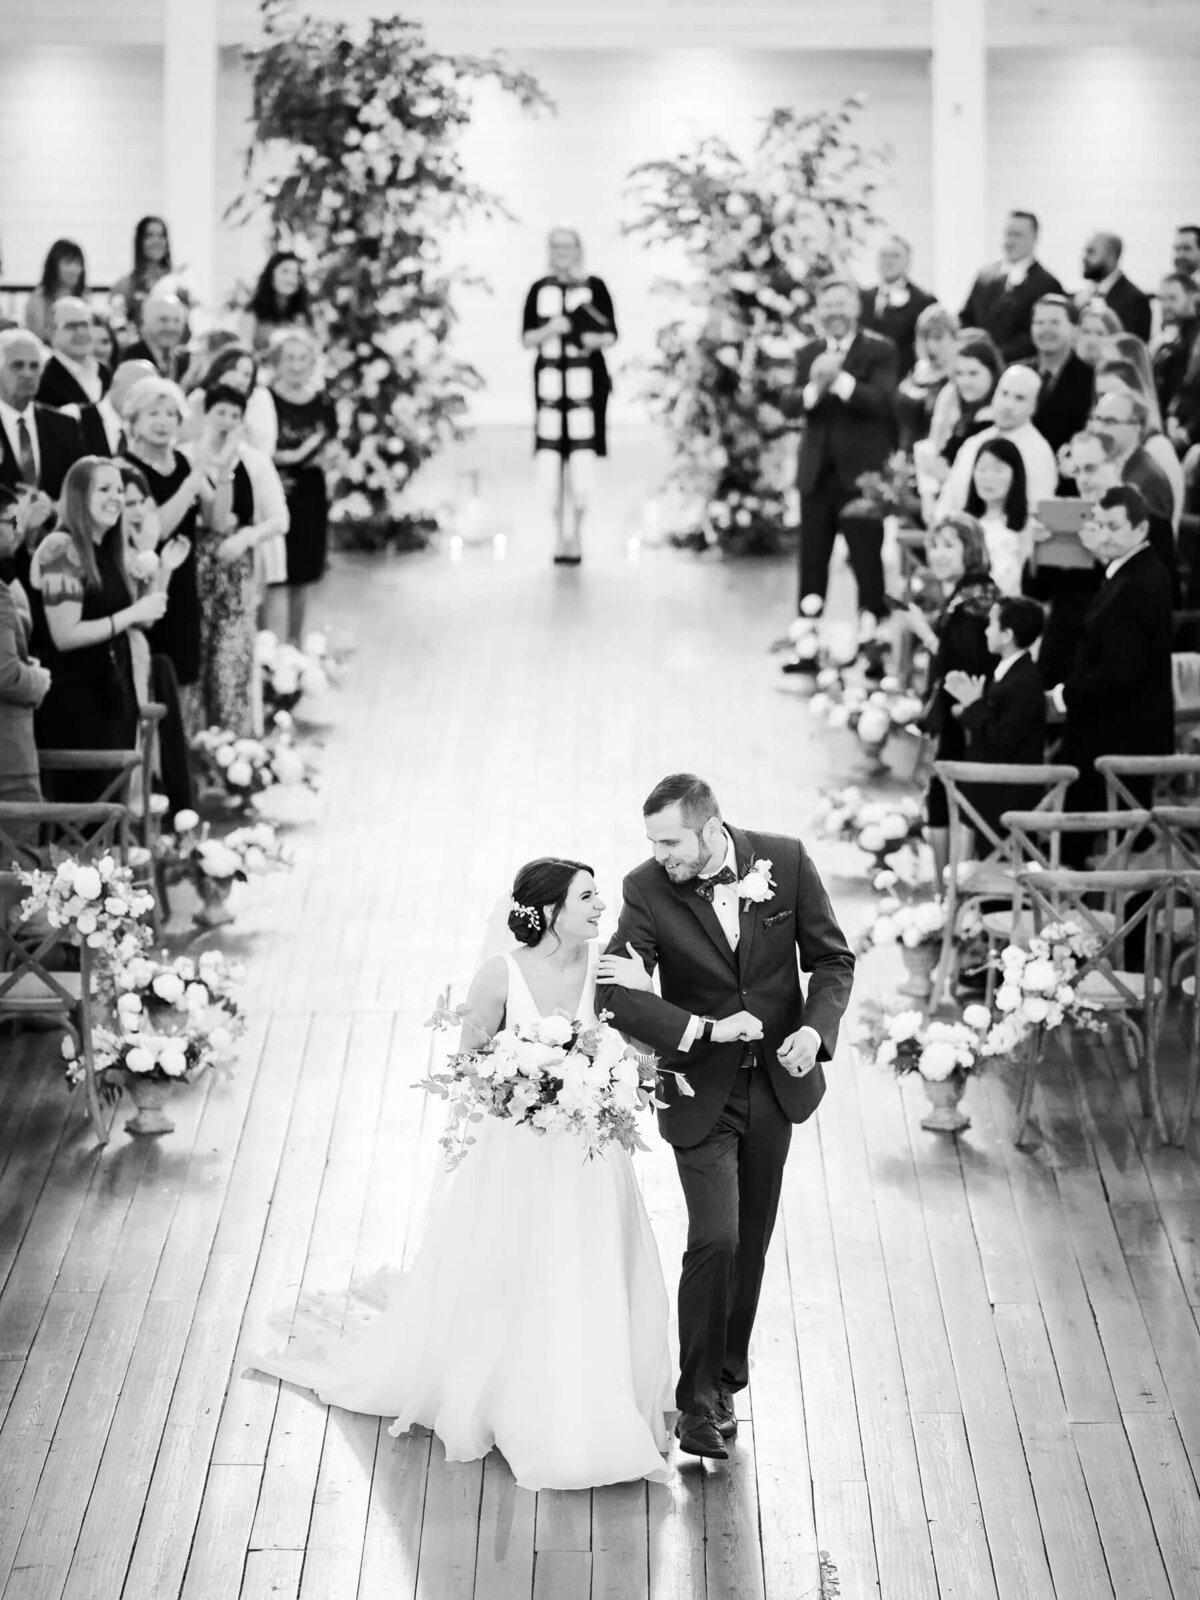 Bride and groom walking down the aisle post-ceremony, surrounded by guests and florals